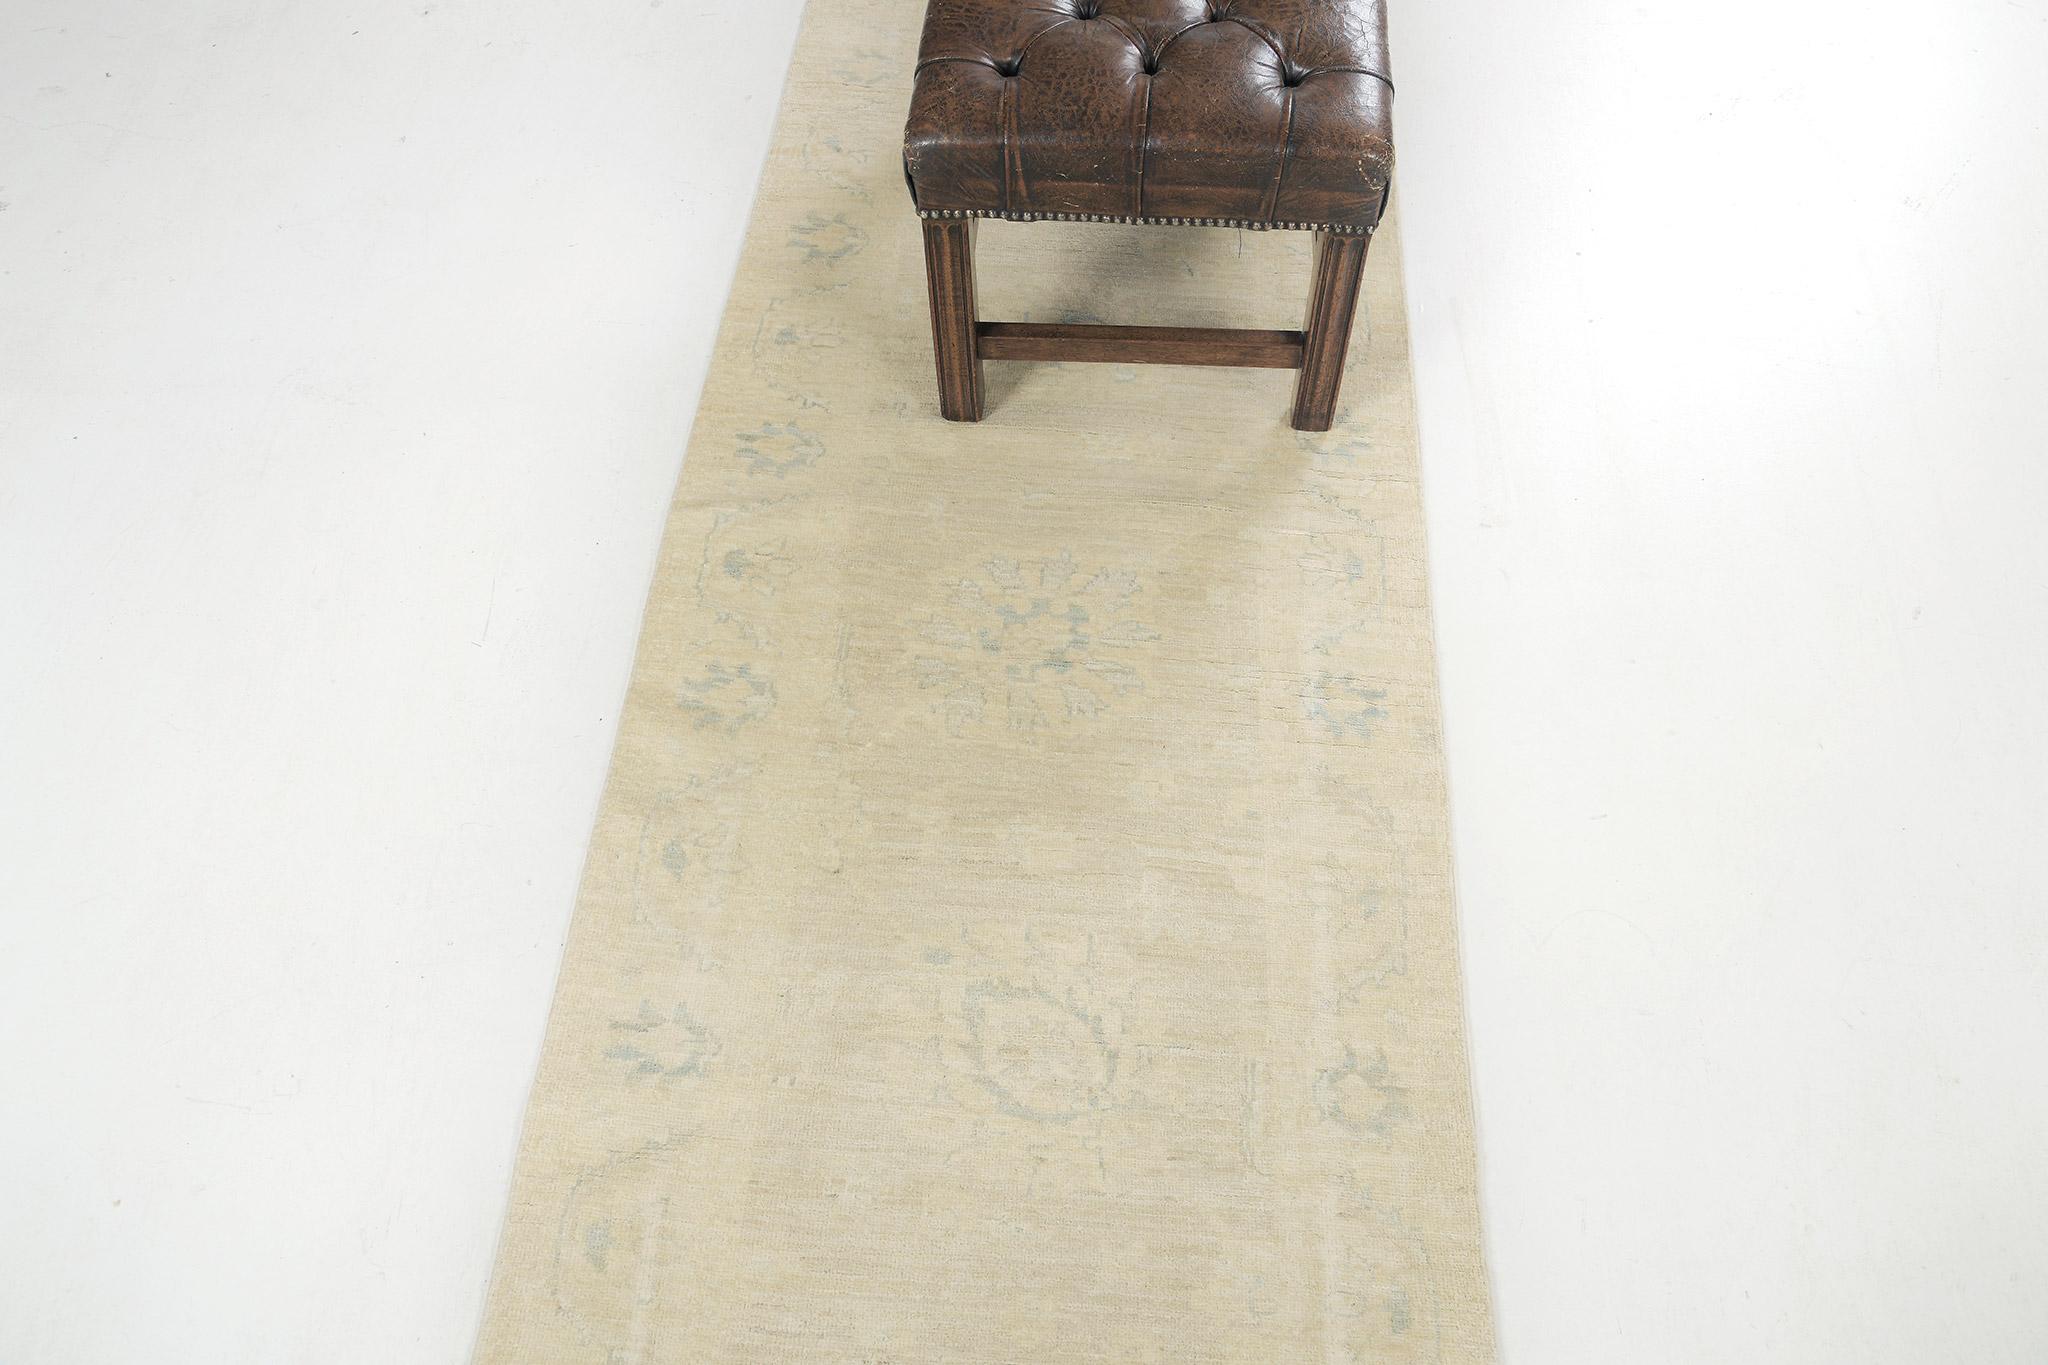 This vintage-style Sultanabad runner from our Rapture Collection was made from hand-spun wool and woven meticulously. All the blooming palmettes, leafy tendrils, and stylized florid borders surrounded symmetrical floral elements. It delivers a